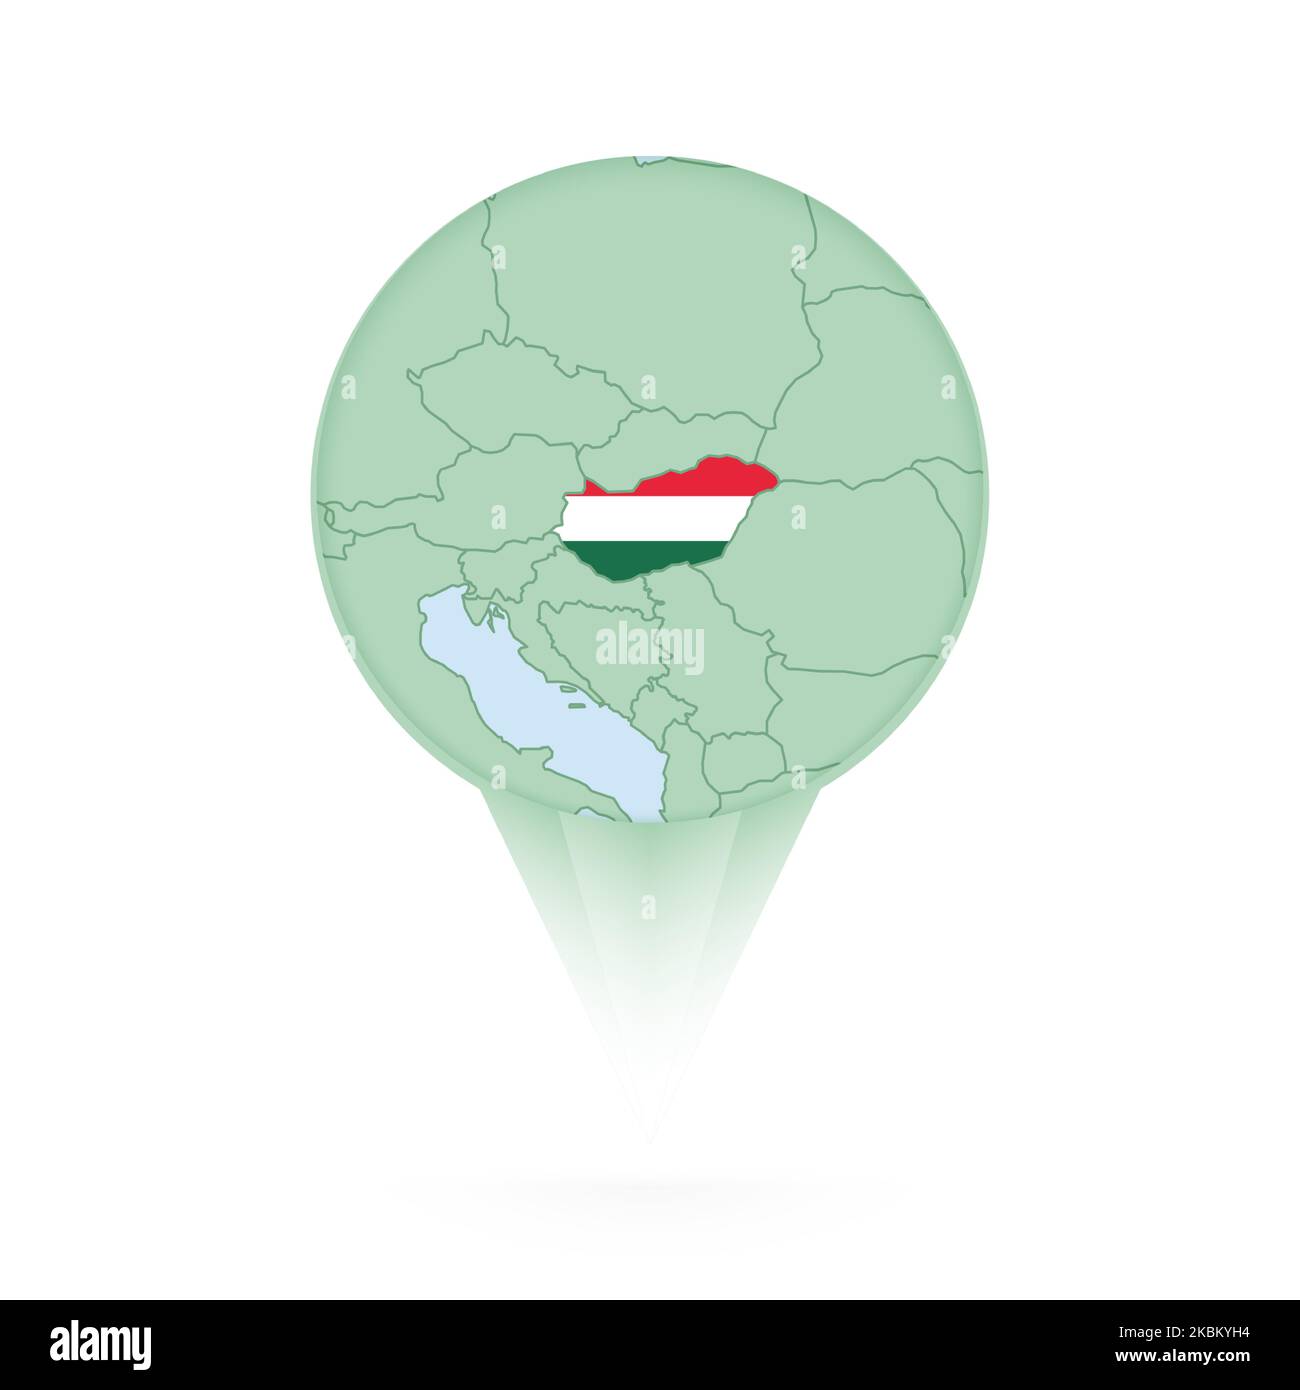 Hungary map, stylish location icon with Hungary map and flag. Green pin icon. Stock Vector